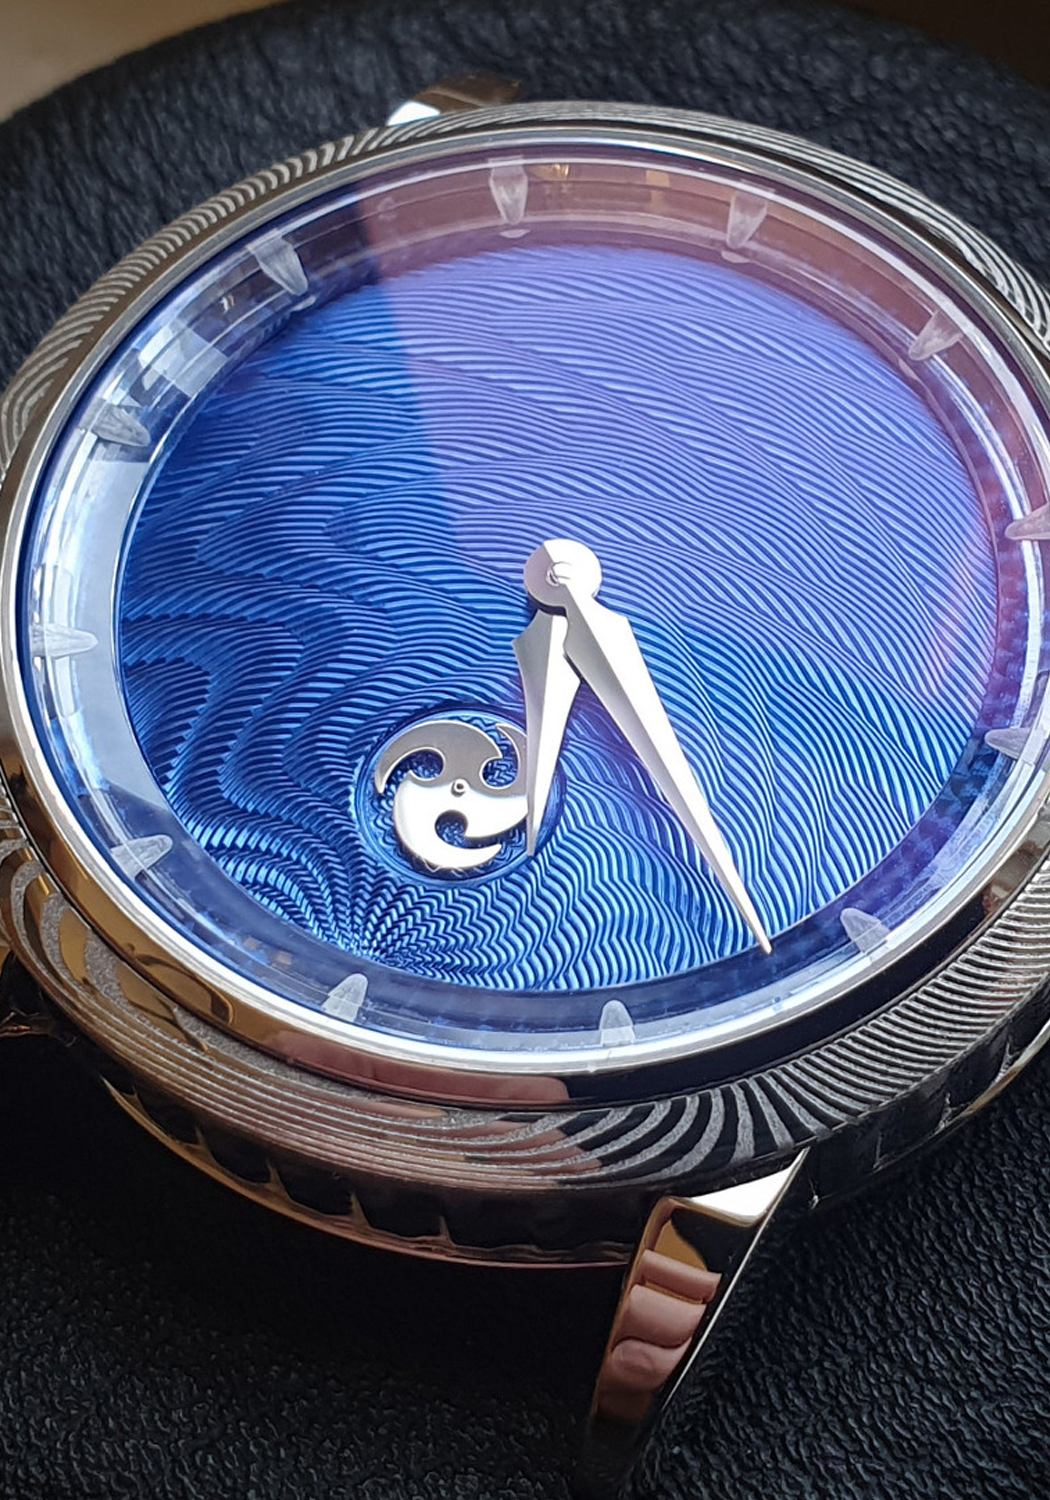 GoS Norrsken Northern Lights Blue Hand-Guilloché Dial | LE50 | OsterJewelers.com